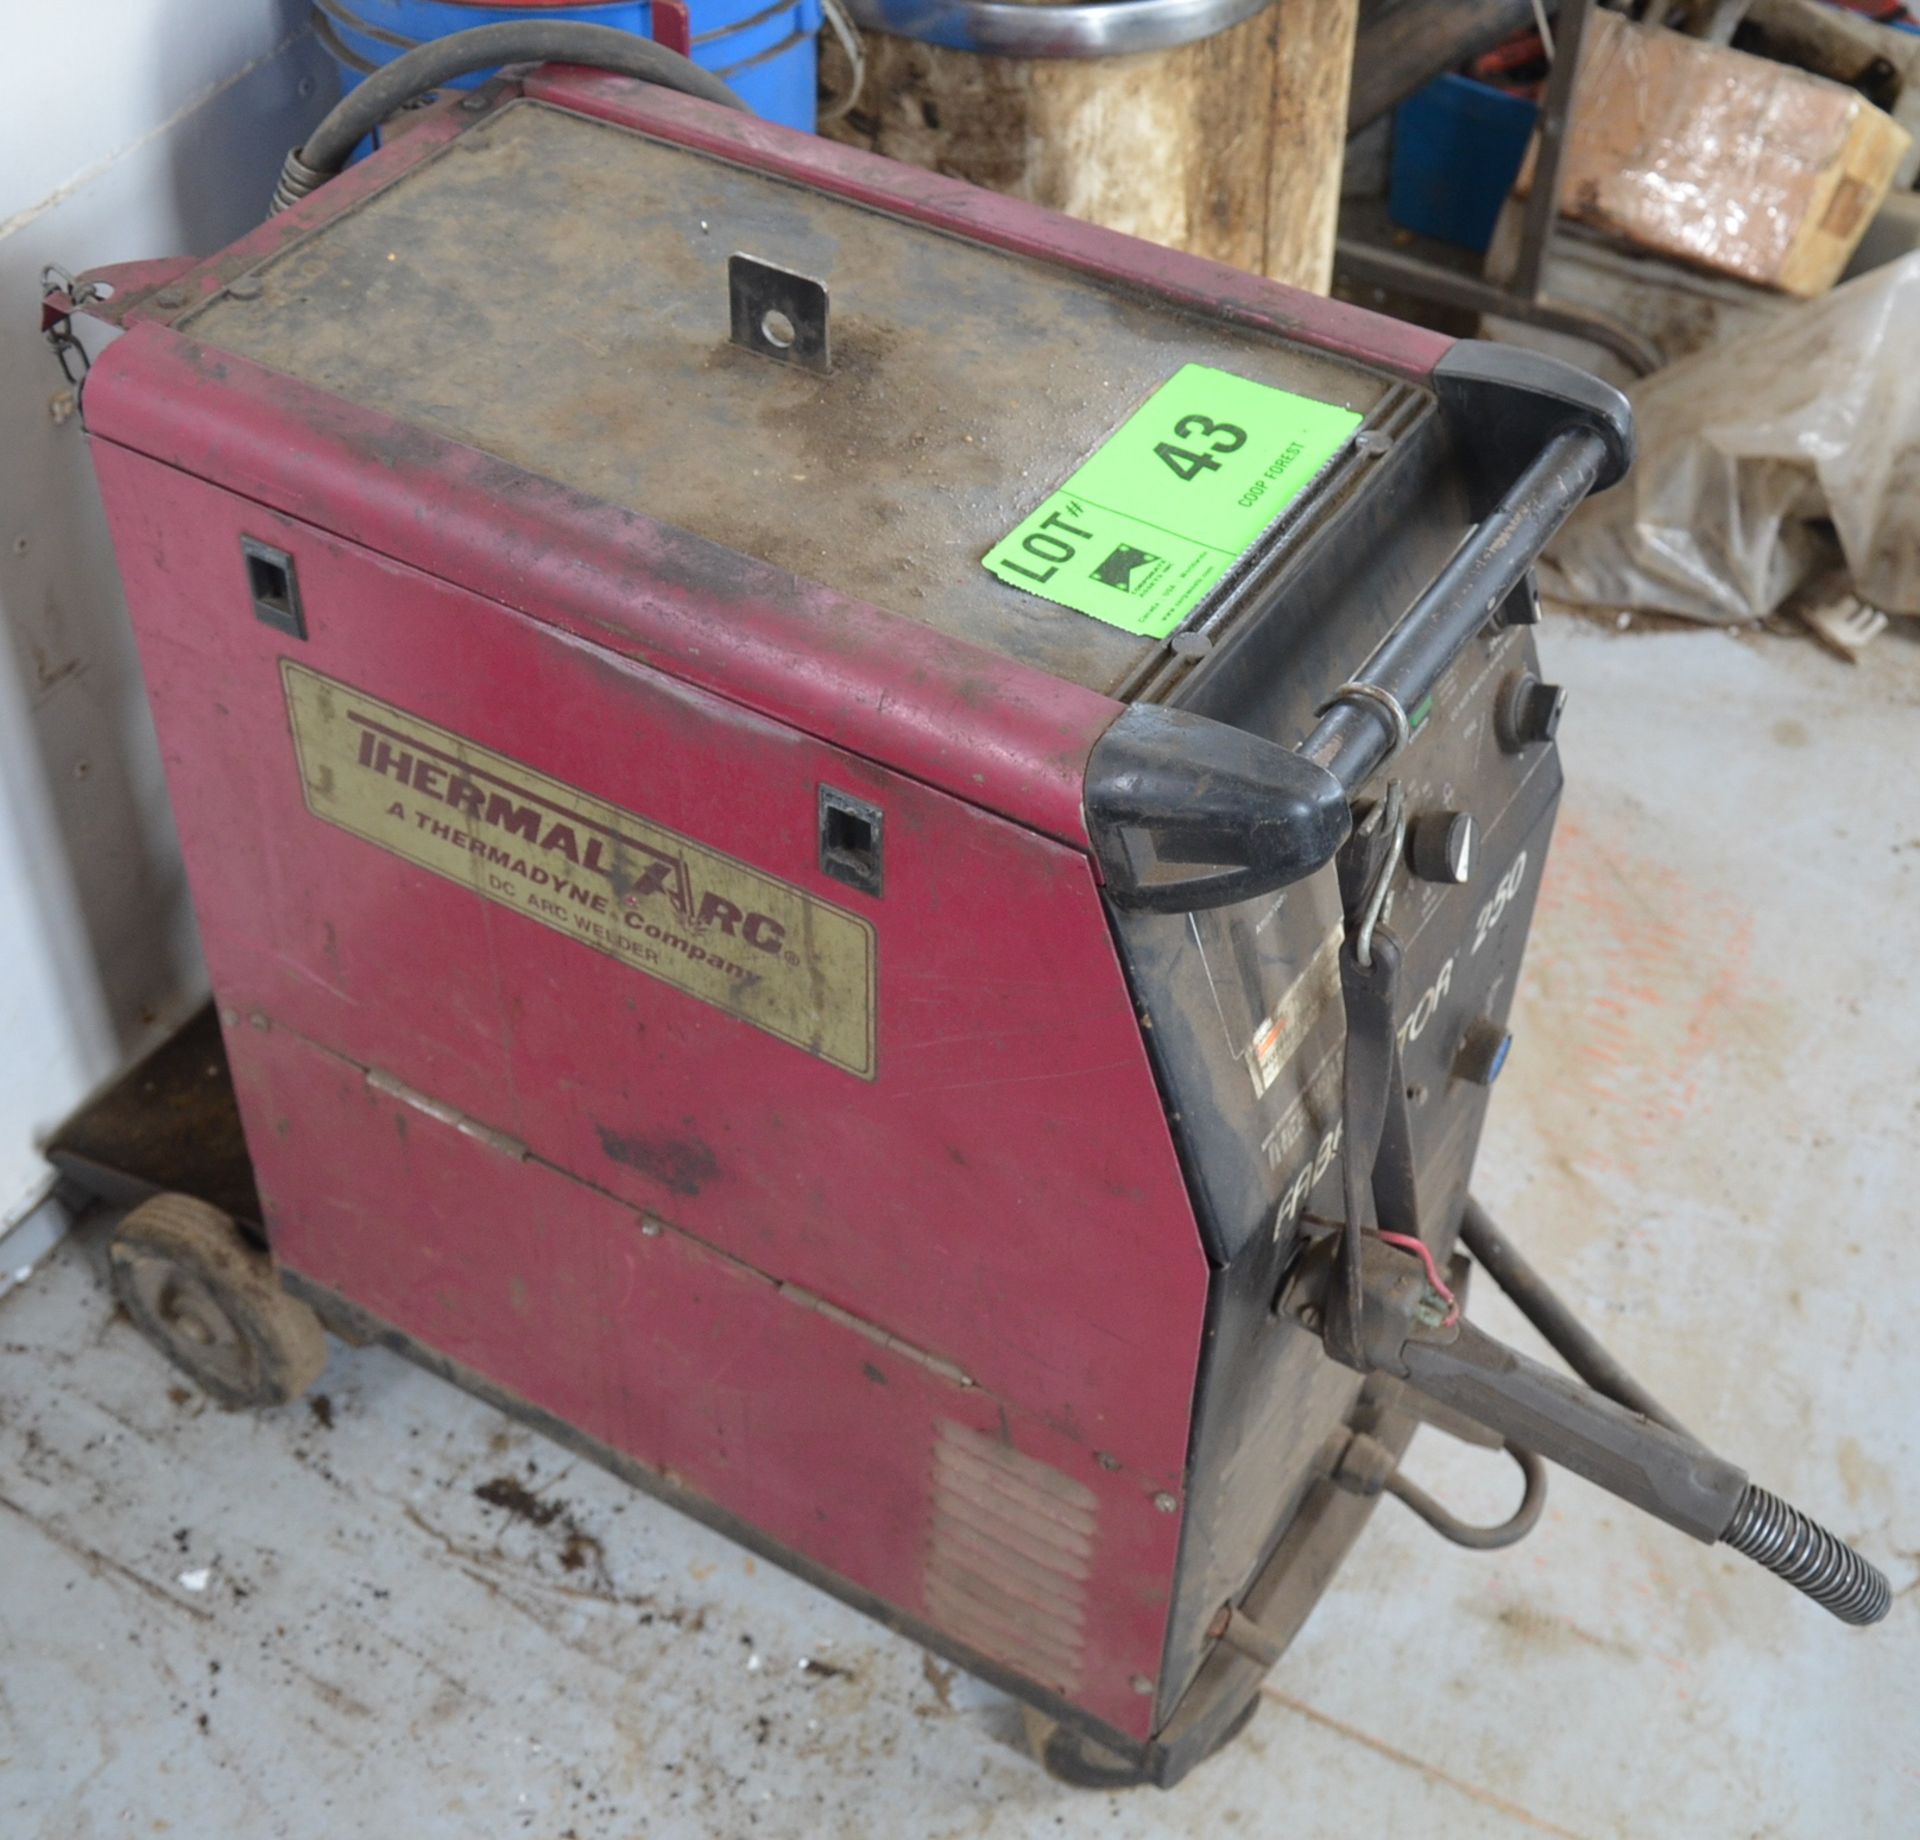 THERMAL ARC FABRICATOR 250 PORTABLE MIG WELDER WITH CABLES AND GUN, S/N N/A - Image 2 of 2